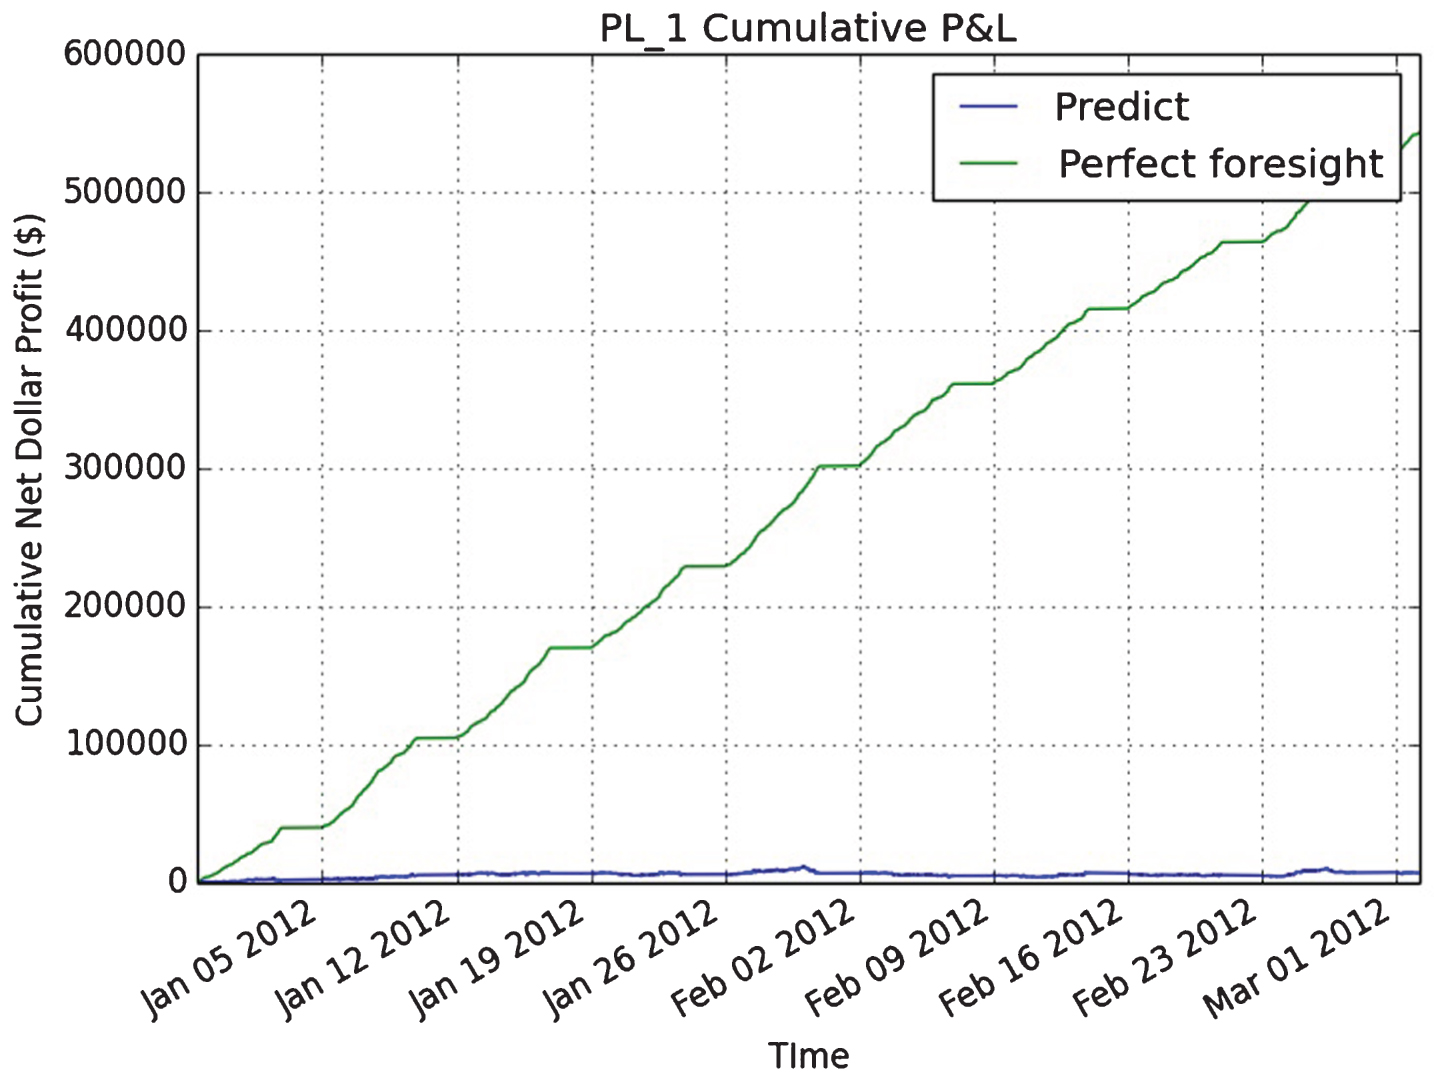 This figure shows the cumulative unrealized net dollar profit of a simple strategy. In order to quantify the impact of information loss, the profit under perfect forecasting information is denoted as ‘perfect foresight’ (green line) and the profit using the DNN prediction is denoted as ‘predict’ (blue line). The graph is shown for one 130 day trading horizon in front month Platinum (PL) futures.